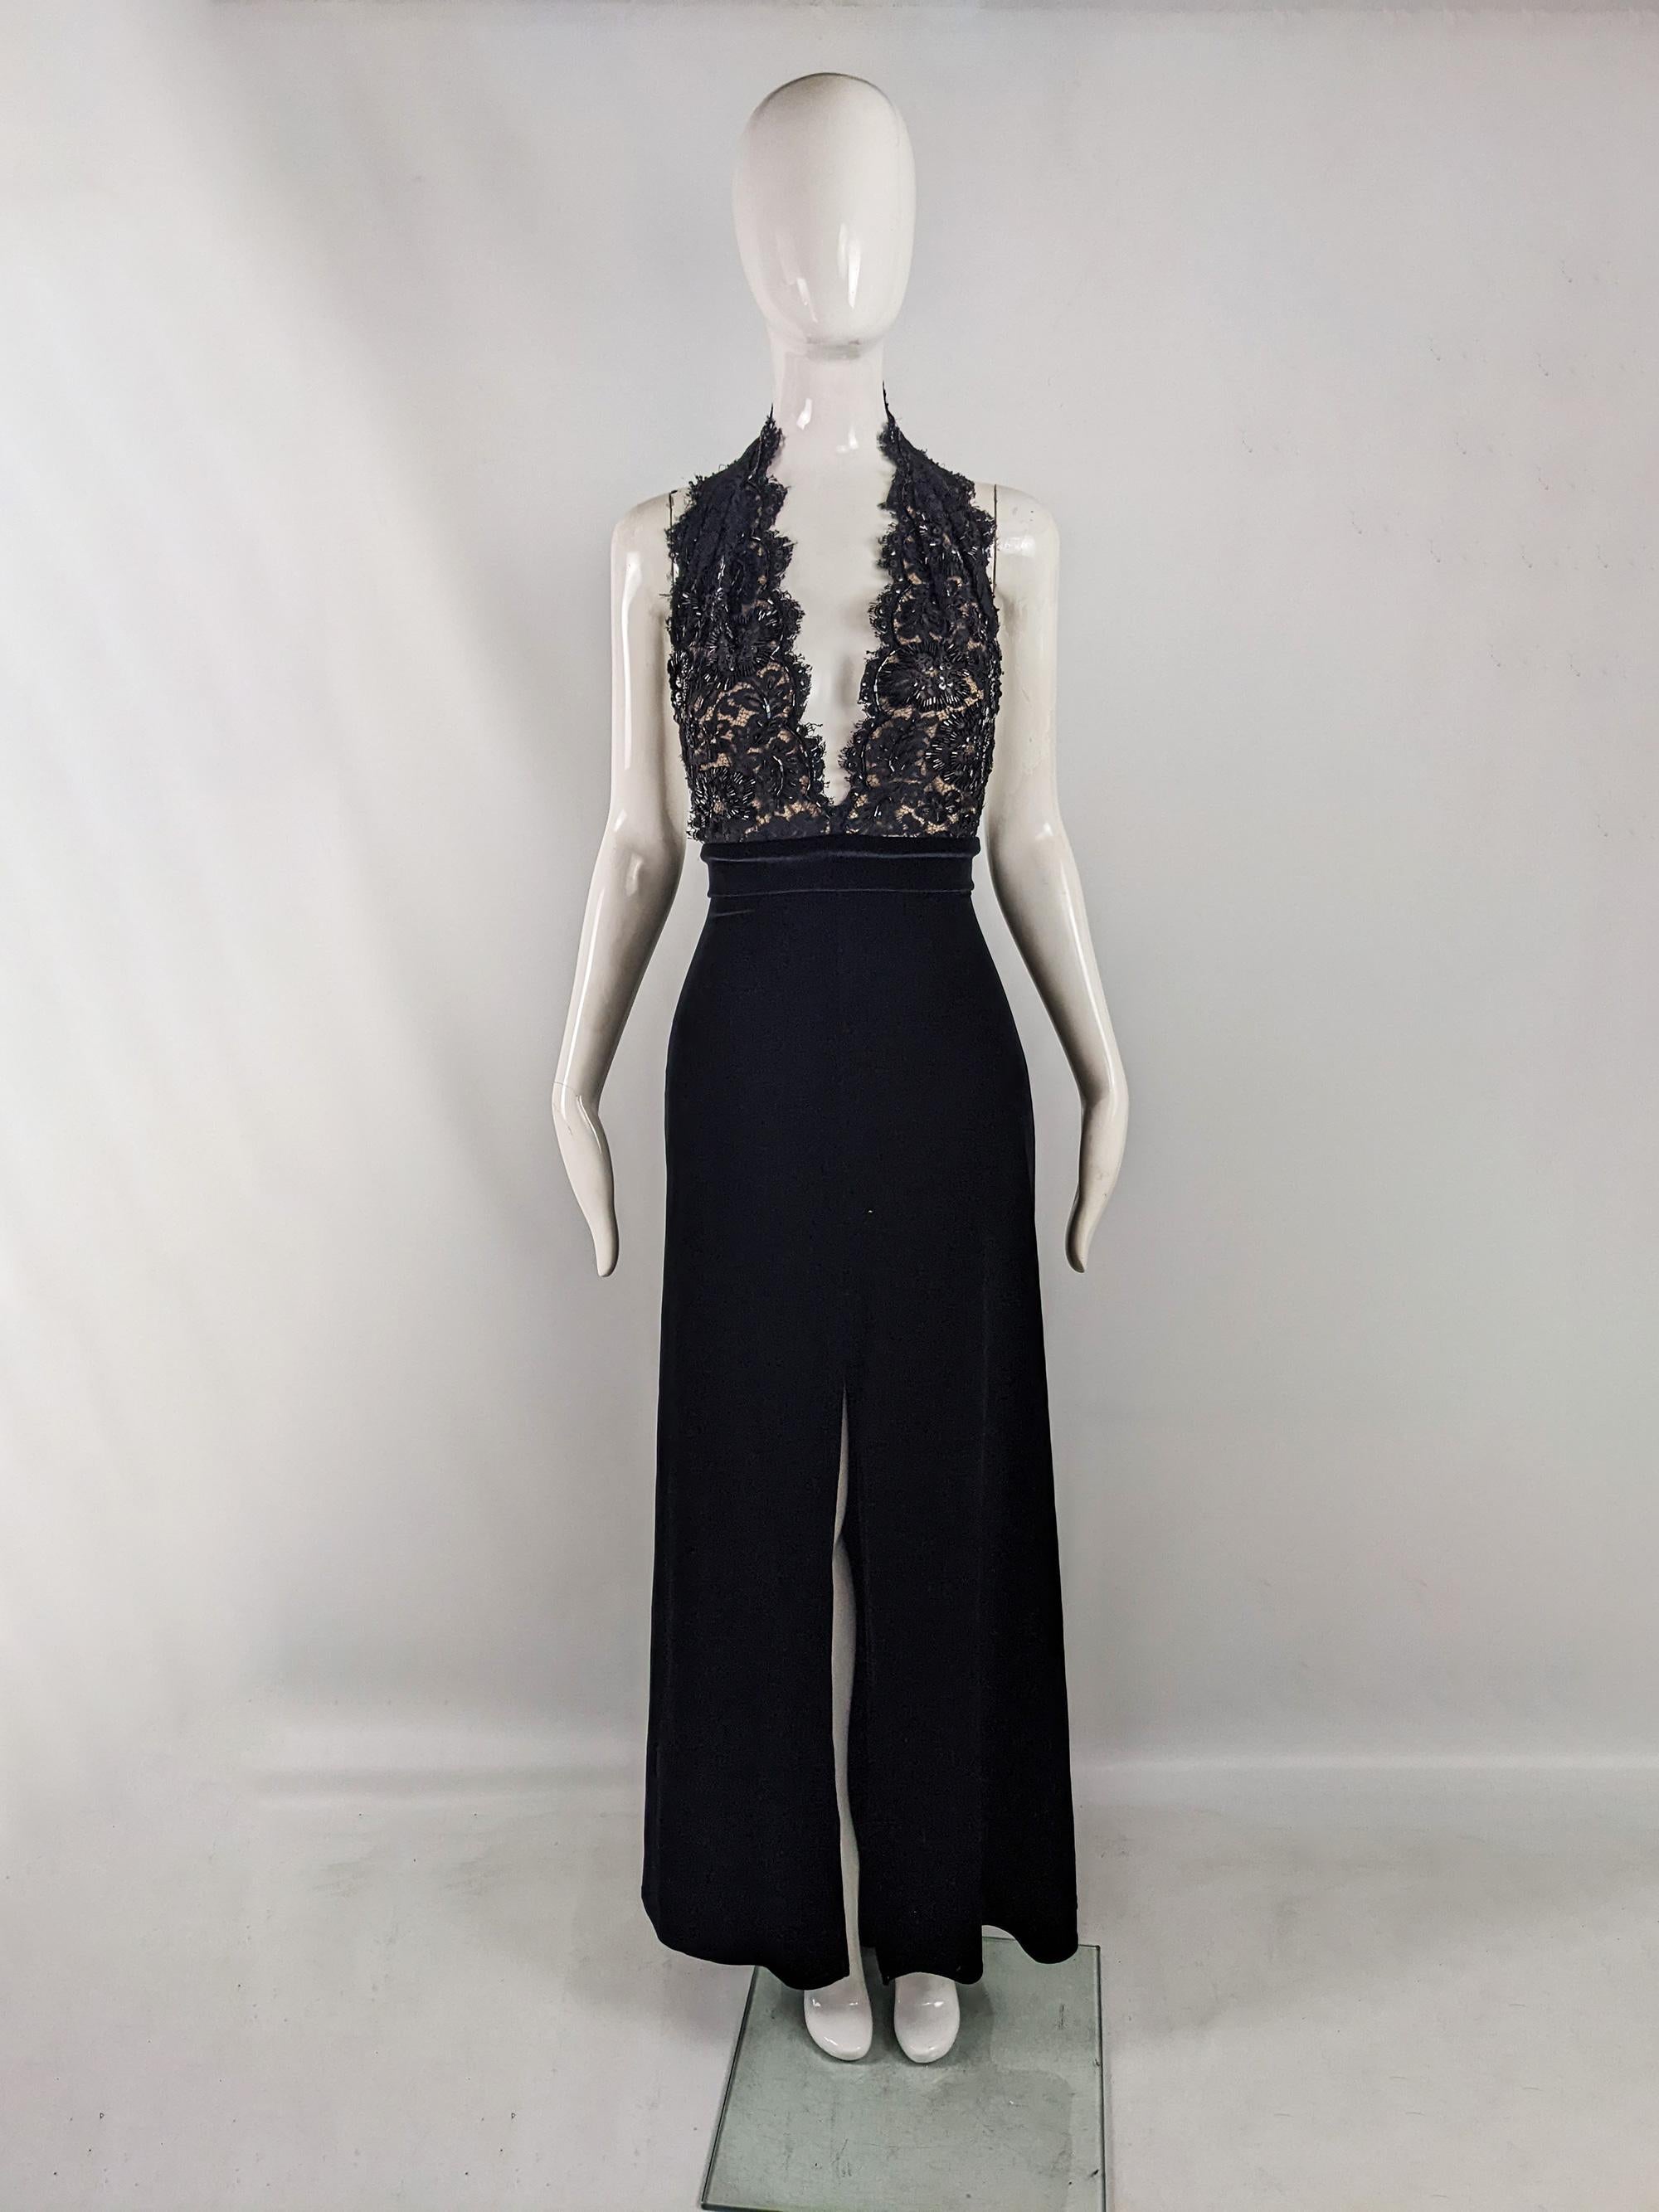 A glamorous vintage evening gown from the 90s by luxury fashion designer, Tadashi Shoji. In a black velour with a nude top and black lace overlay. It has a sexy deep plunging neckline and beautiful beading smattered on the lace top. There is a deep